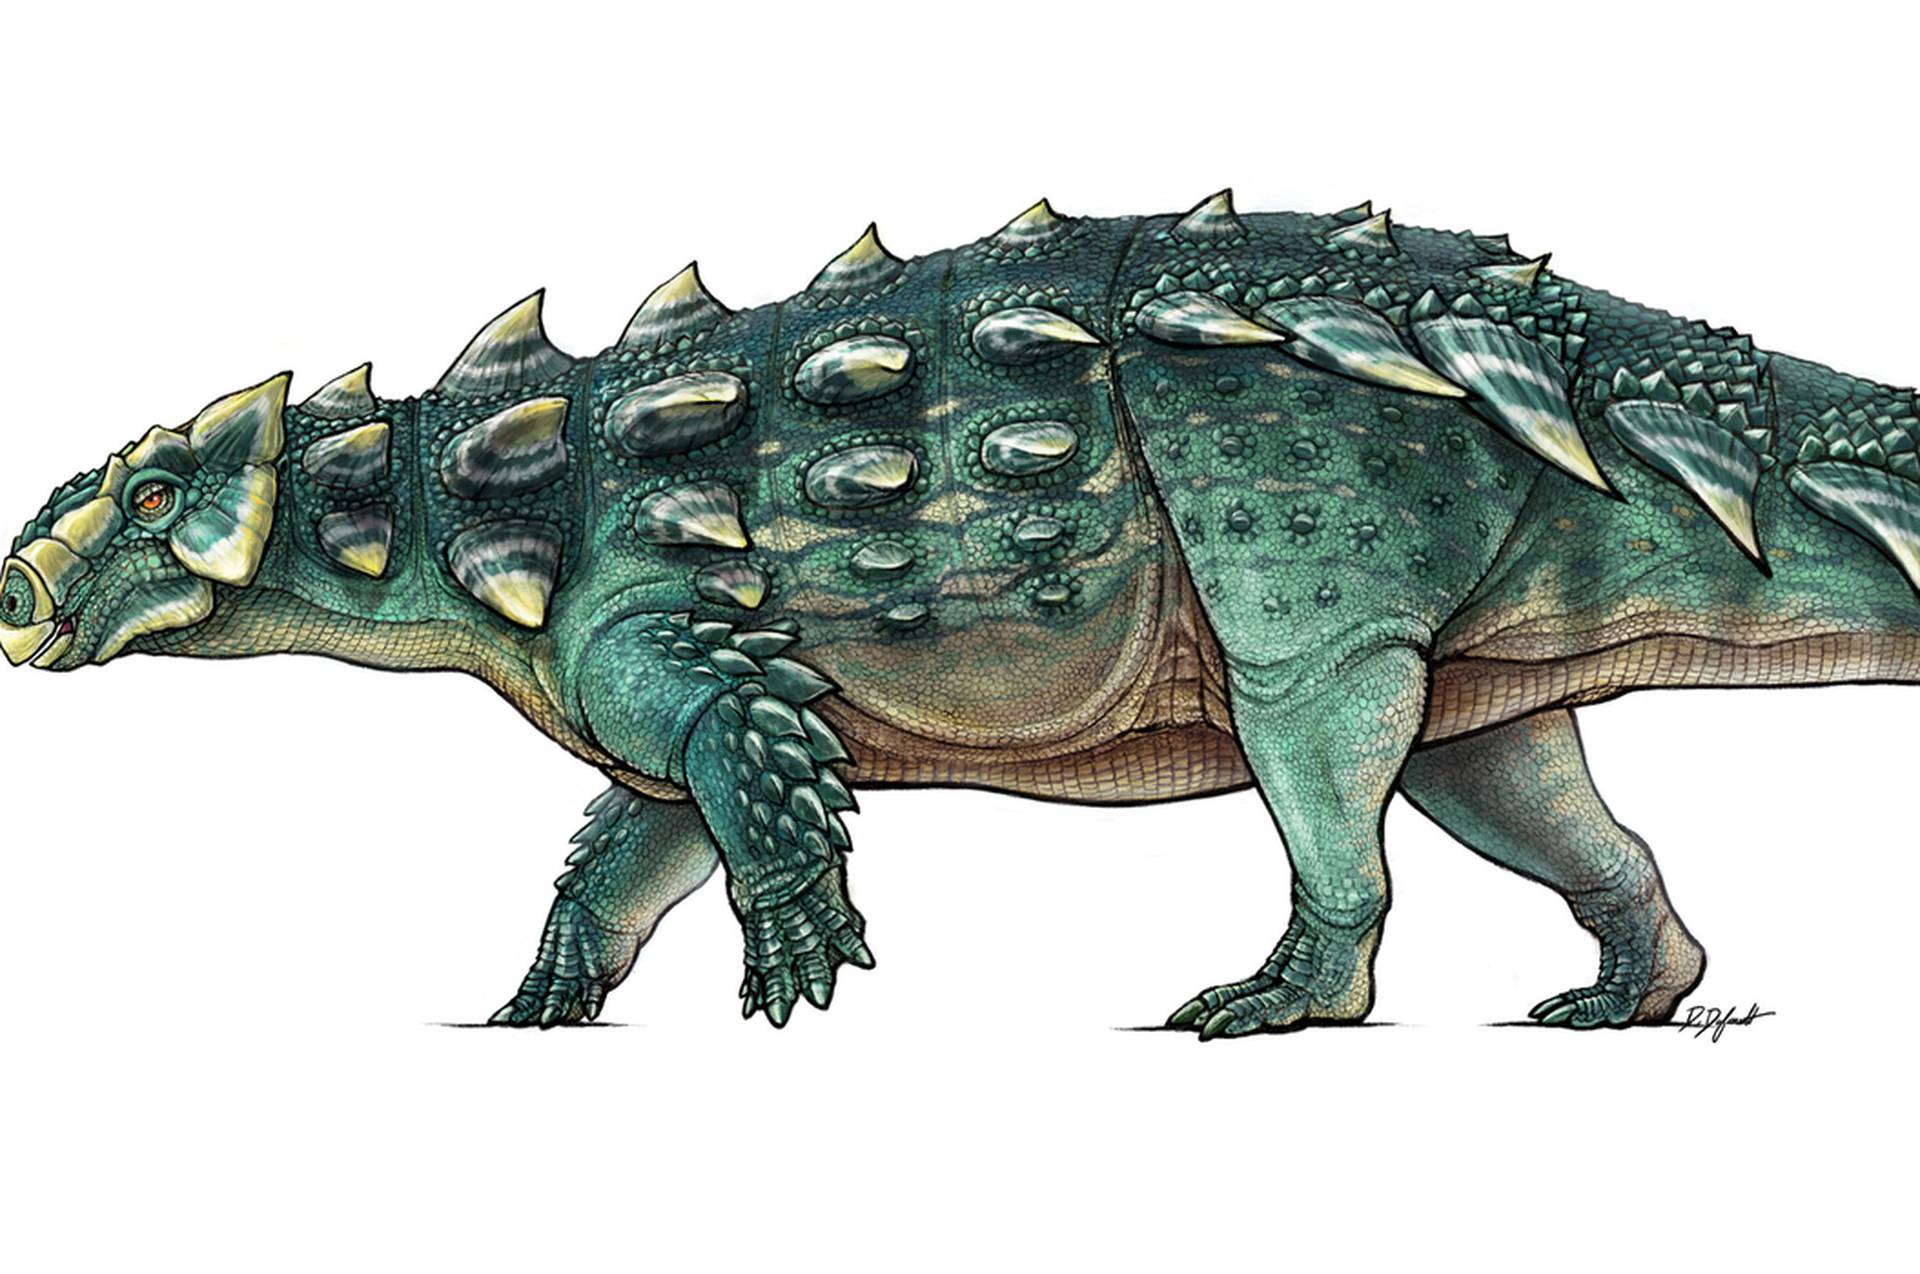 A life recreation of the newly discovered armored dinosaur named Zuul crurivastator from northern Montana seen in this illustration provided by the Royal Ontario Museum in Toronto